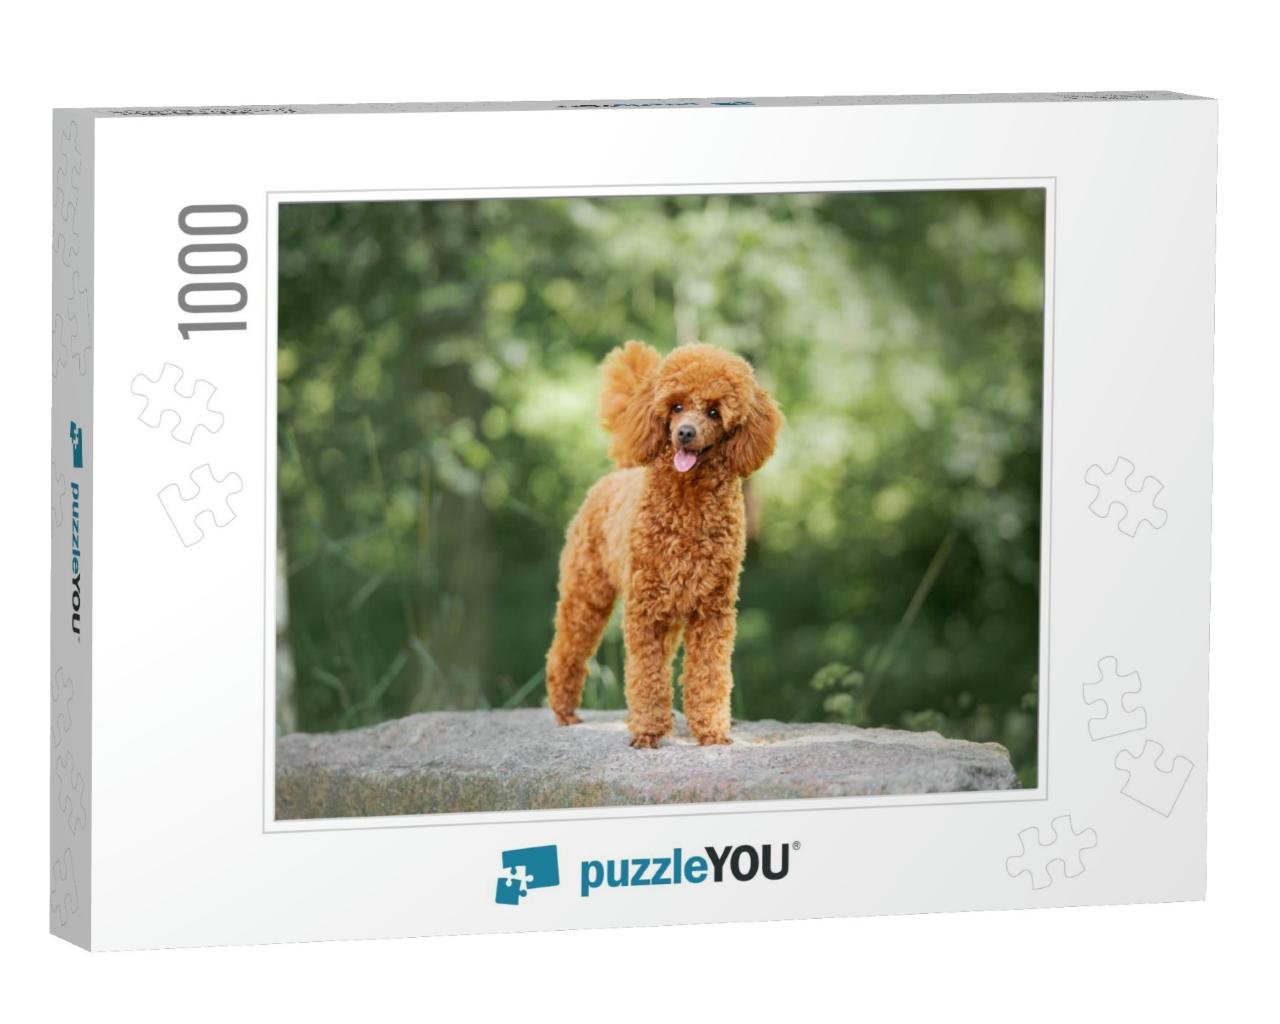 Miniature Poodle Puppy Standing on the Rock... Jigsaw Puzzle with 1000 pieces